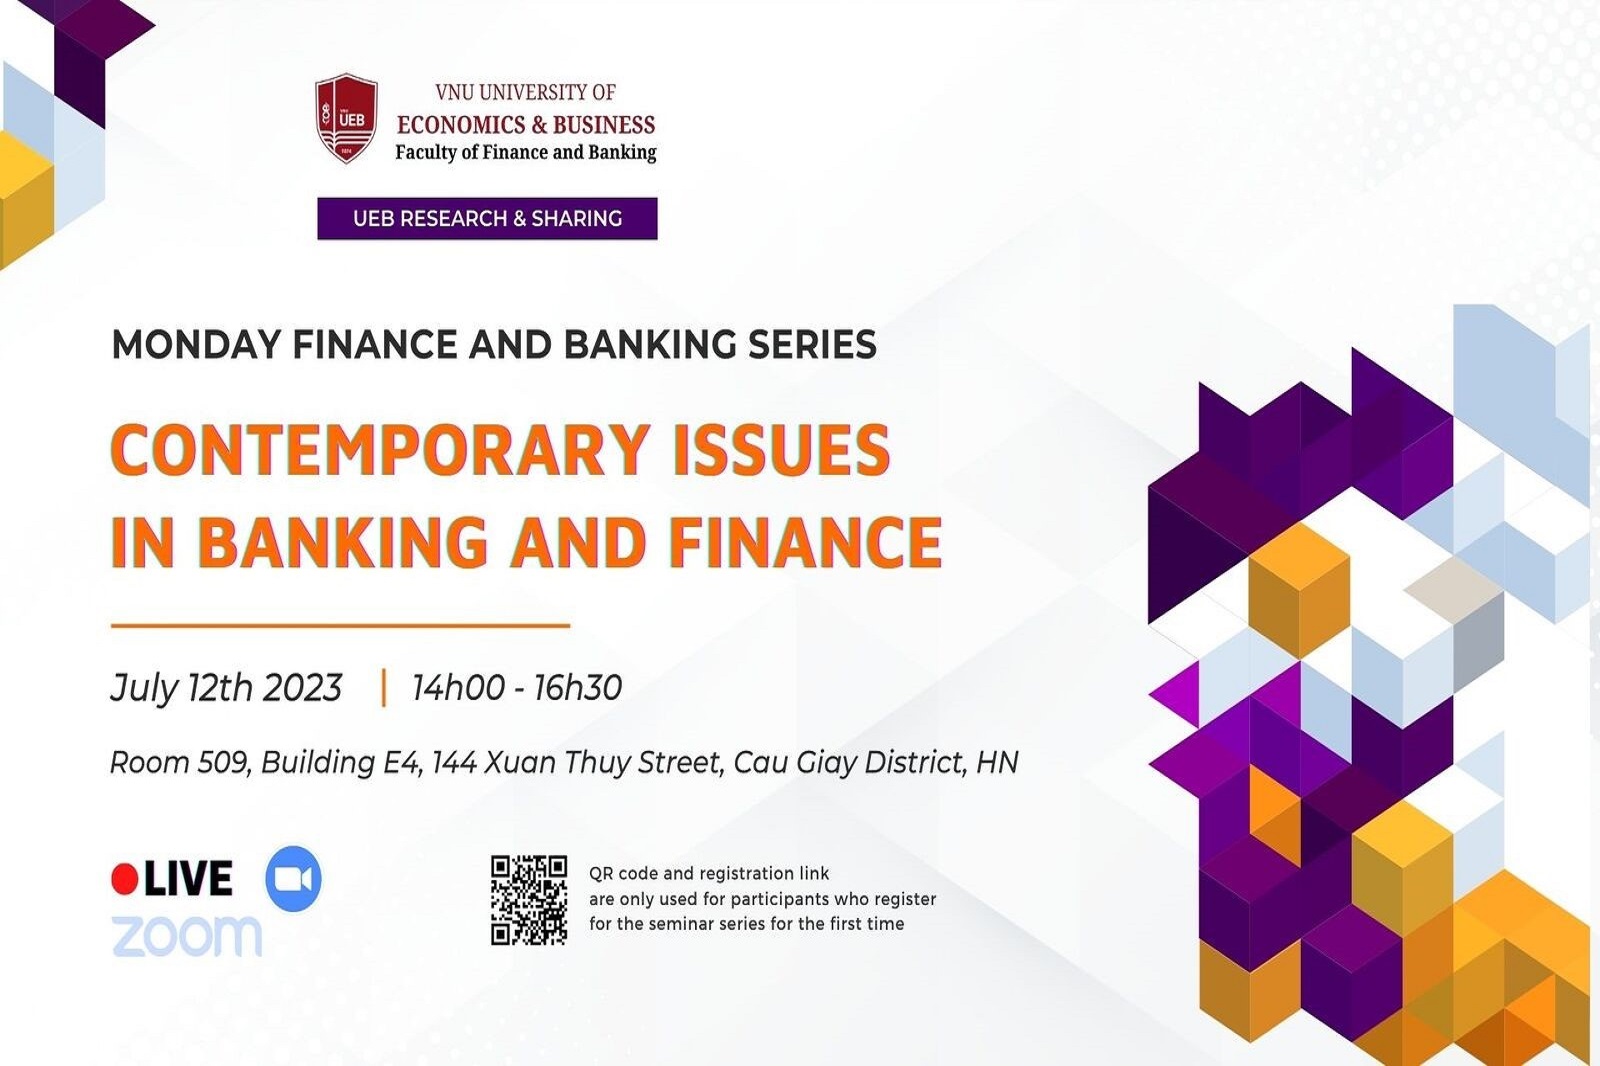 Tọa đàm khoa học “Contemporary Issues in Banking and Finance”- Monday Finance and Banking Series tháng 7/2023